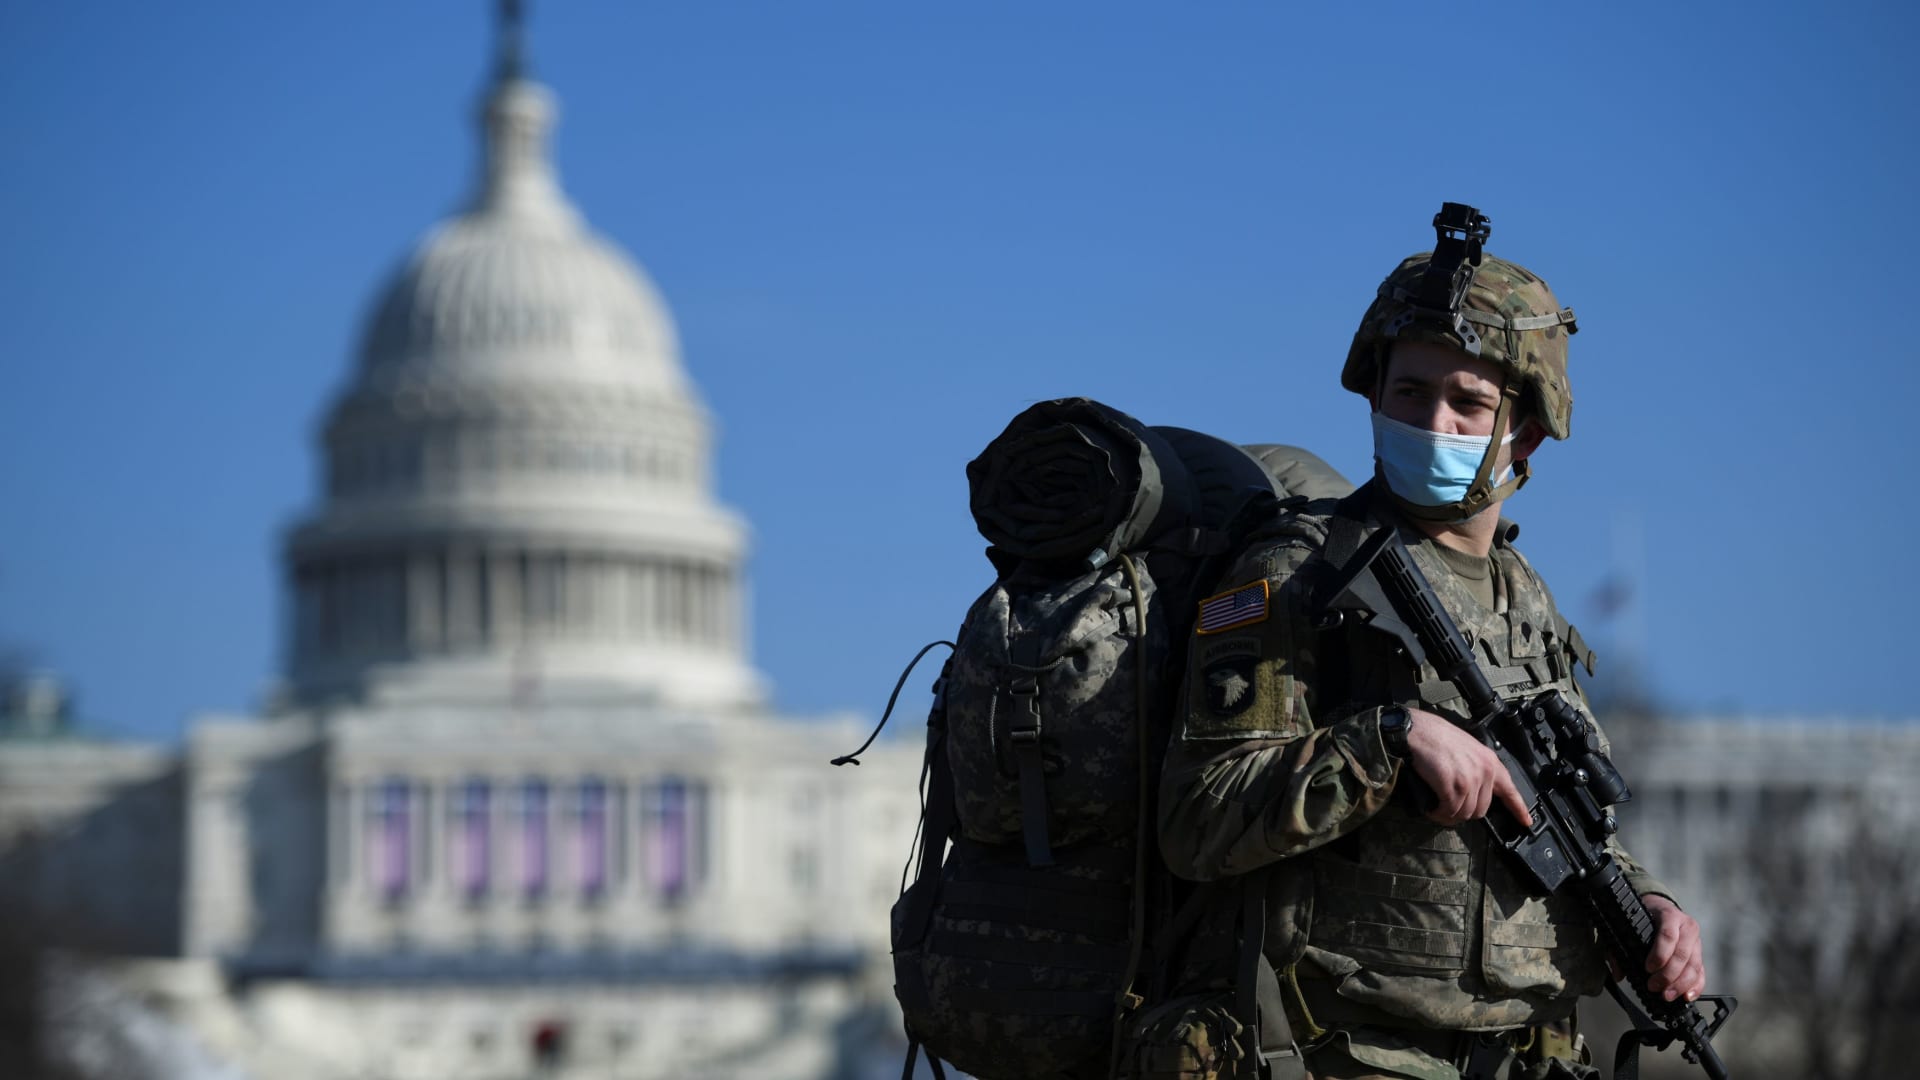 A member of the National Guard mounts guard near the U.S. Capitol building, as the House of Representatives debates impeaching U.S. President Donald Trump a week after his supporters stormed the Capitol building in Washington, U.S., January 13, 2021.